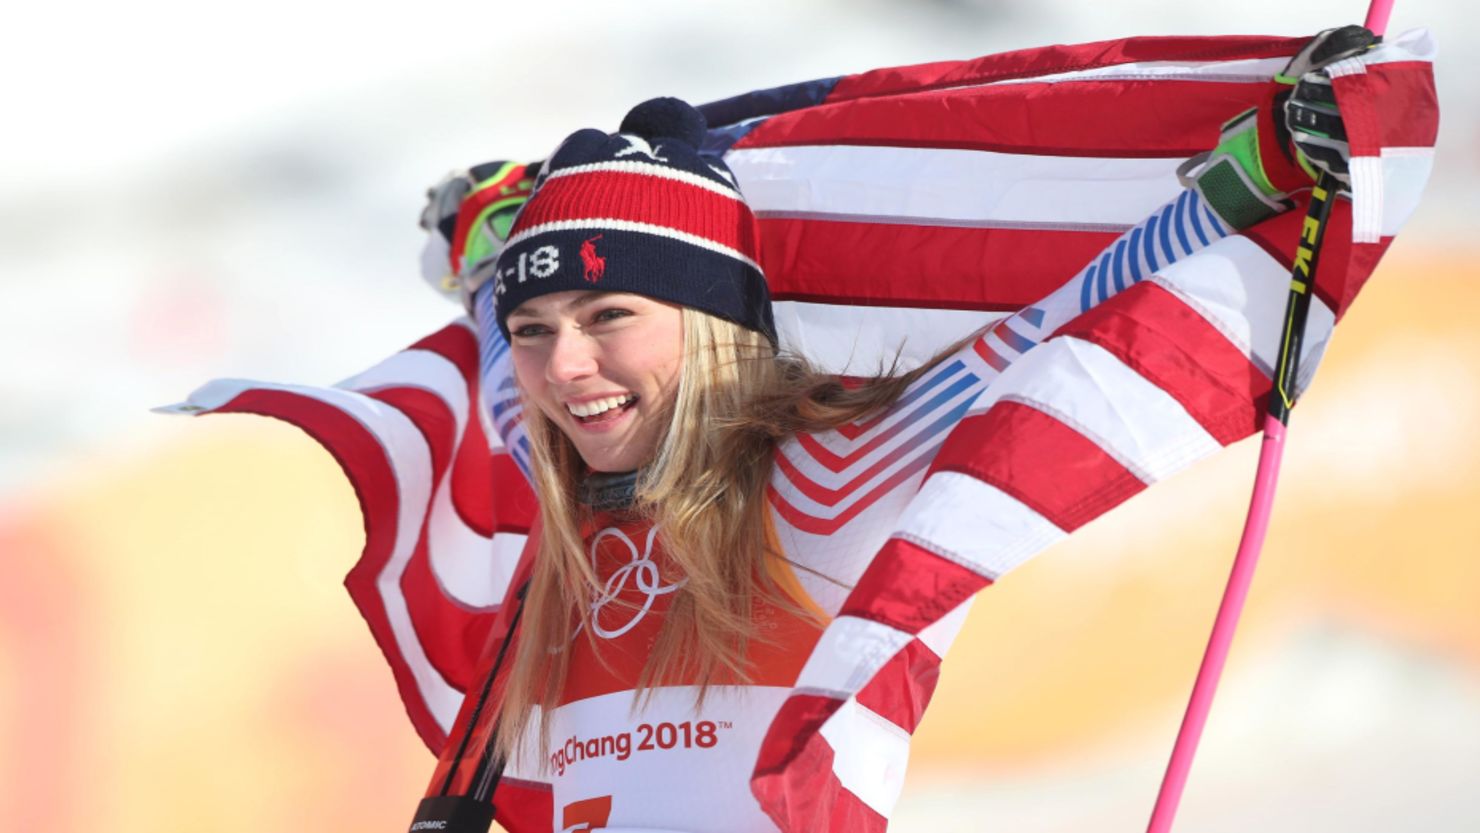 Mikaela Shiffrin celebrates with the American flag after winning gold in the giant slalom on Thursday. (Tim Clayton/Corbis/Getty Images)